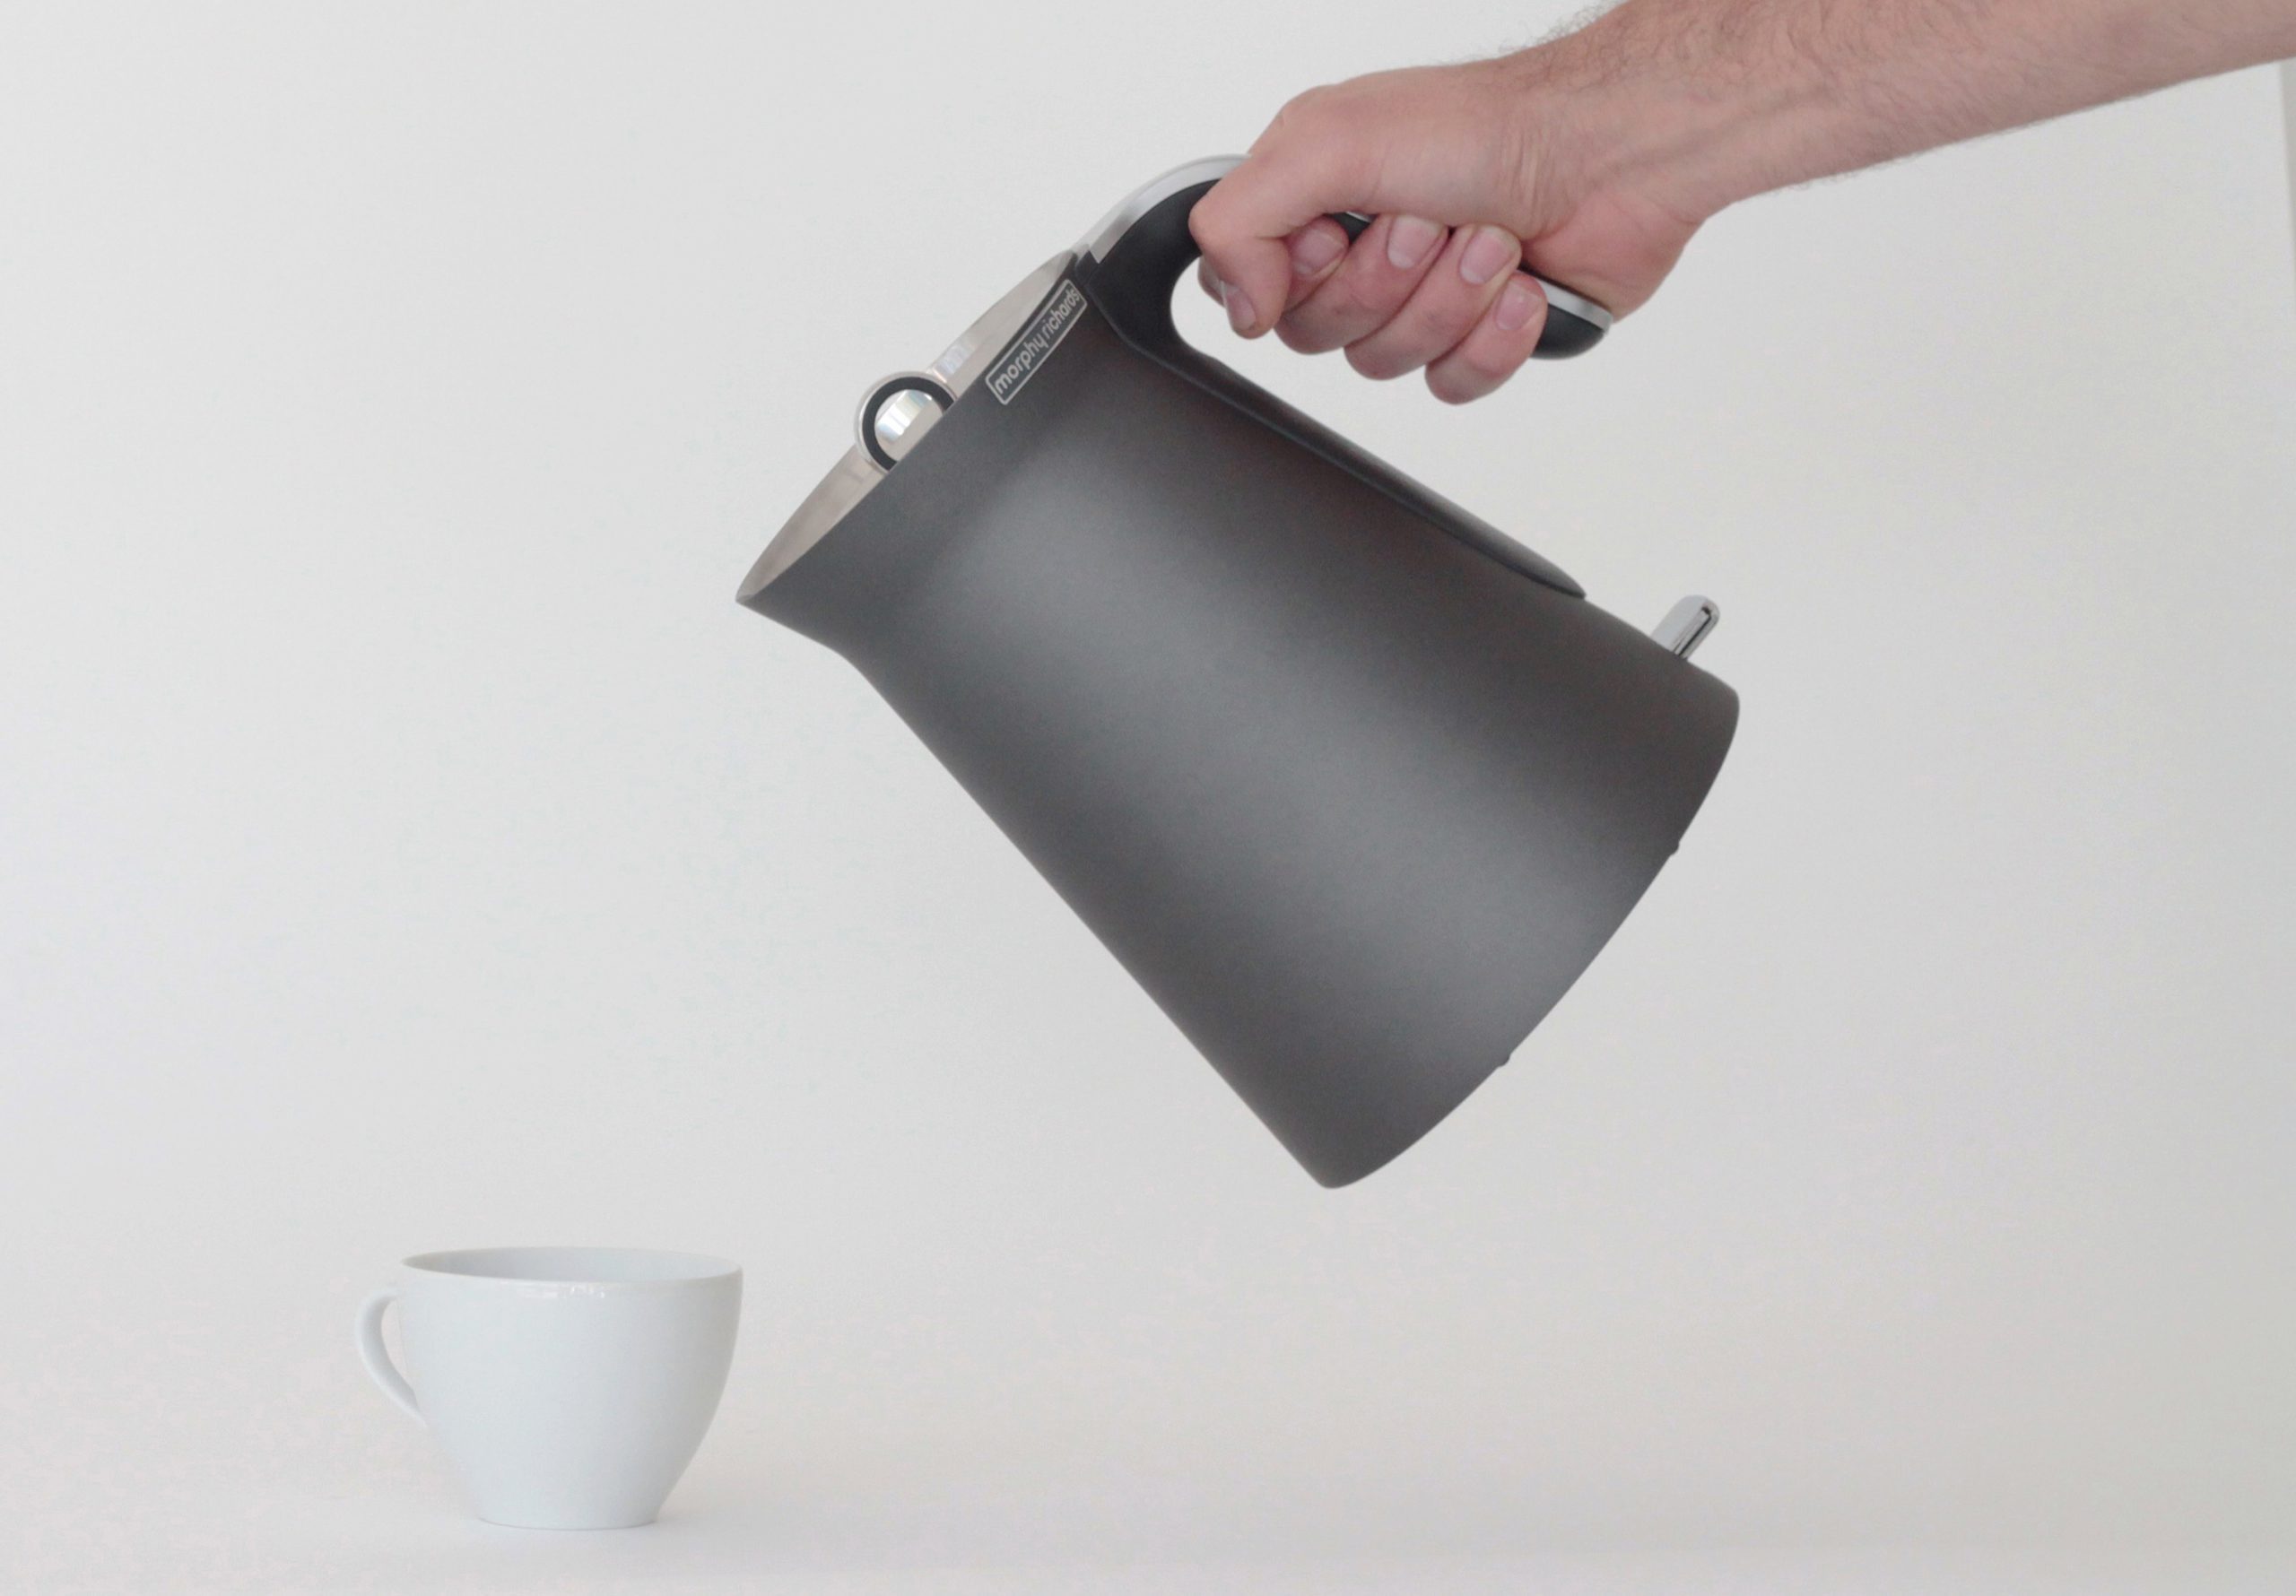 The award winning Authentics kettle by Rodd design is a prime example of the power of product brand language